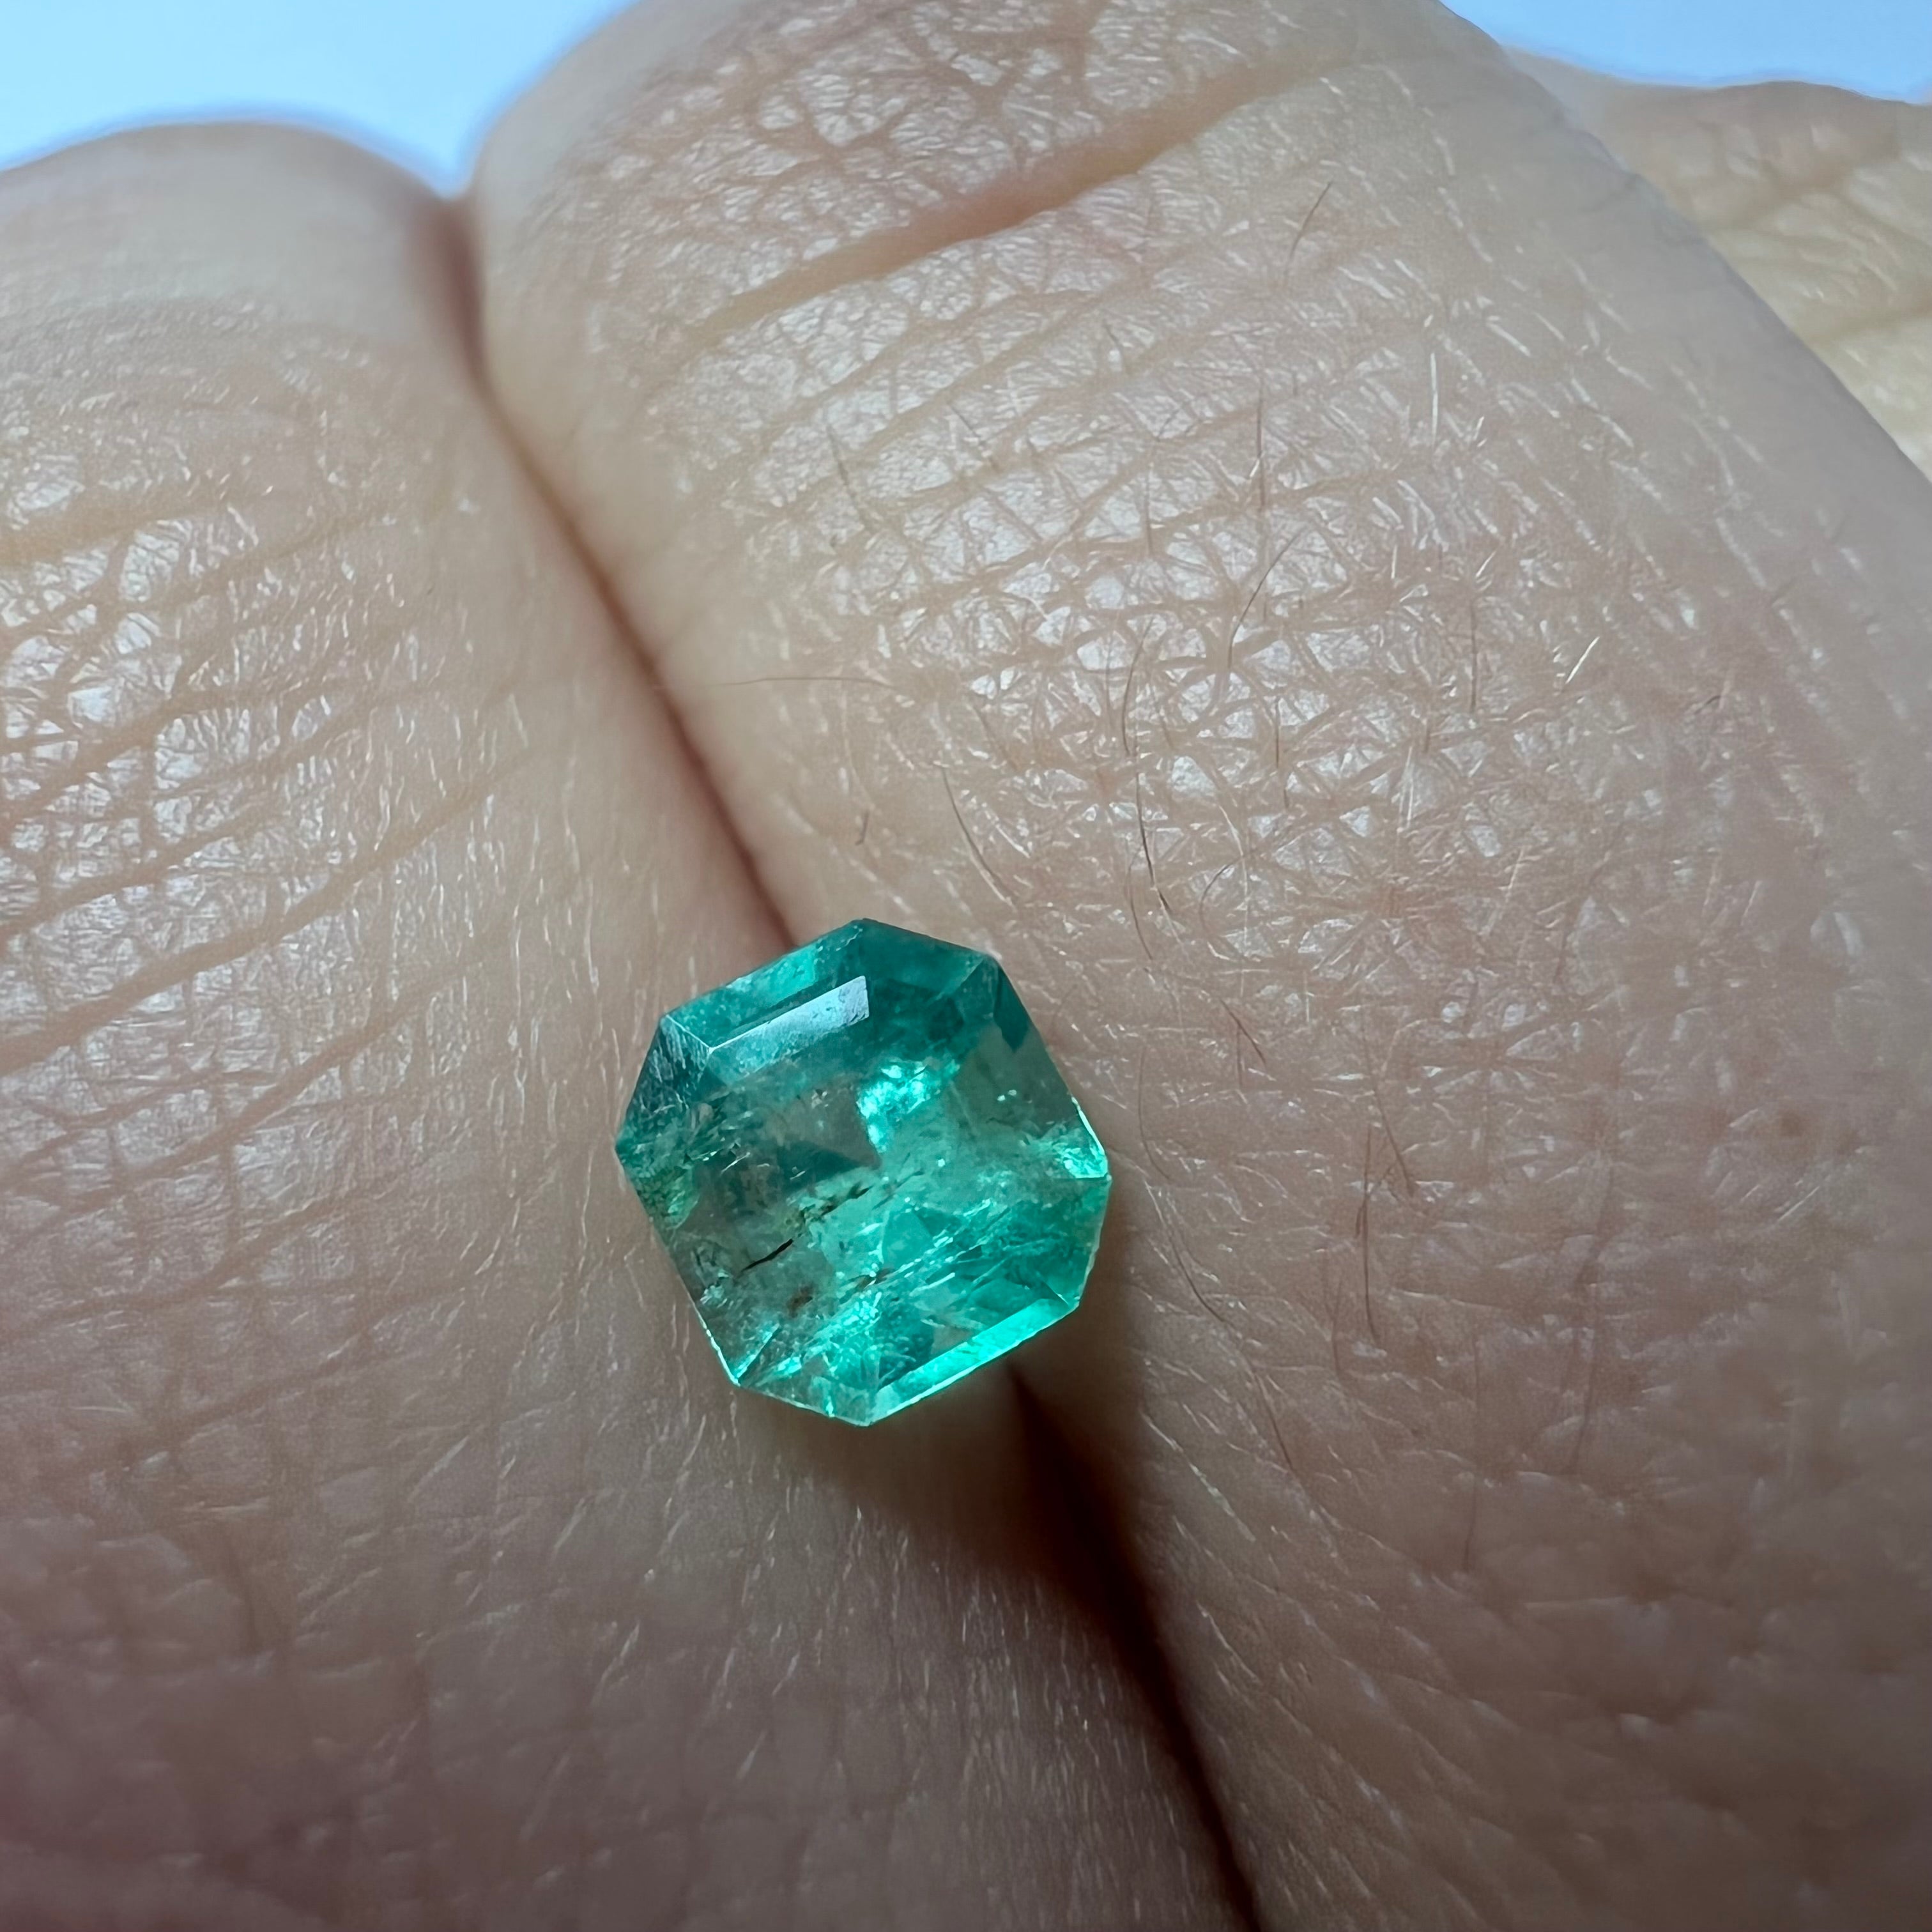 .61CT Loose Natural Colombian Emerald Radiant Cut 5.52x5.13x3.73mm Earth mined G